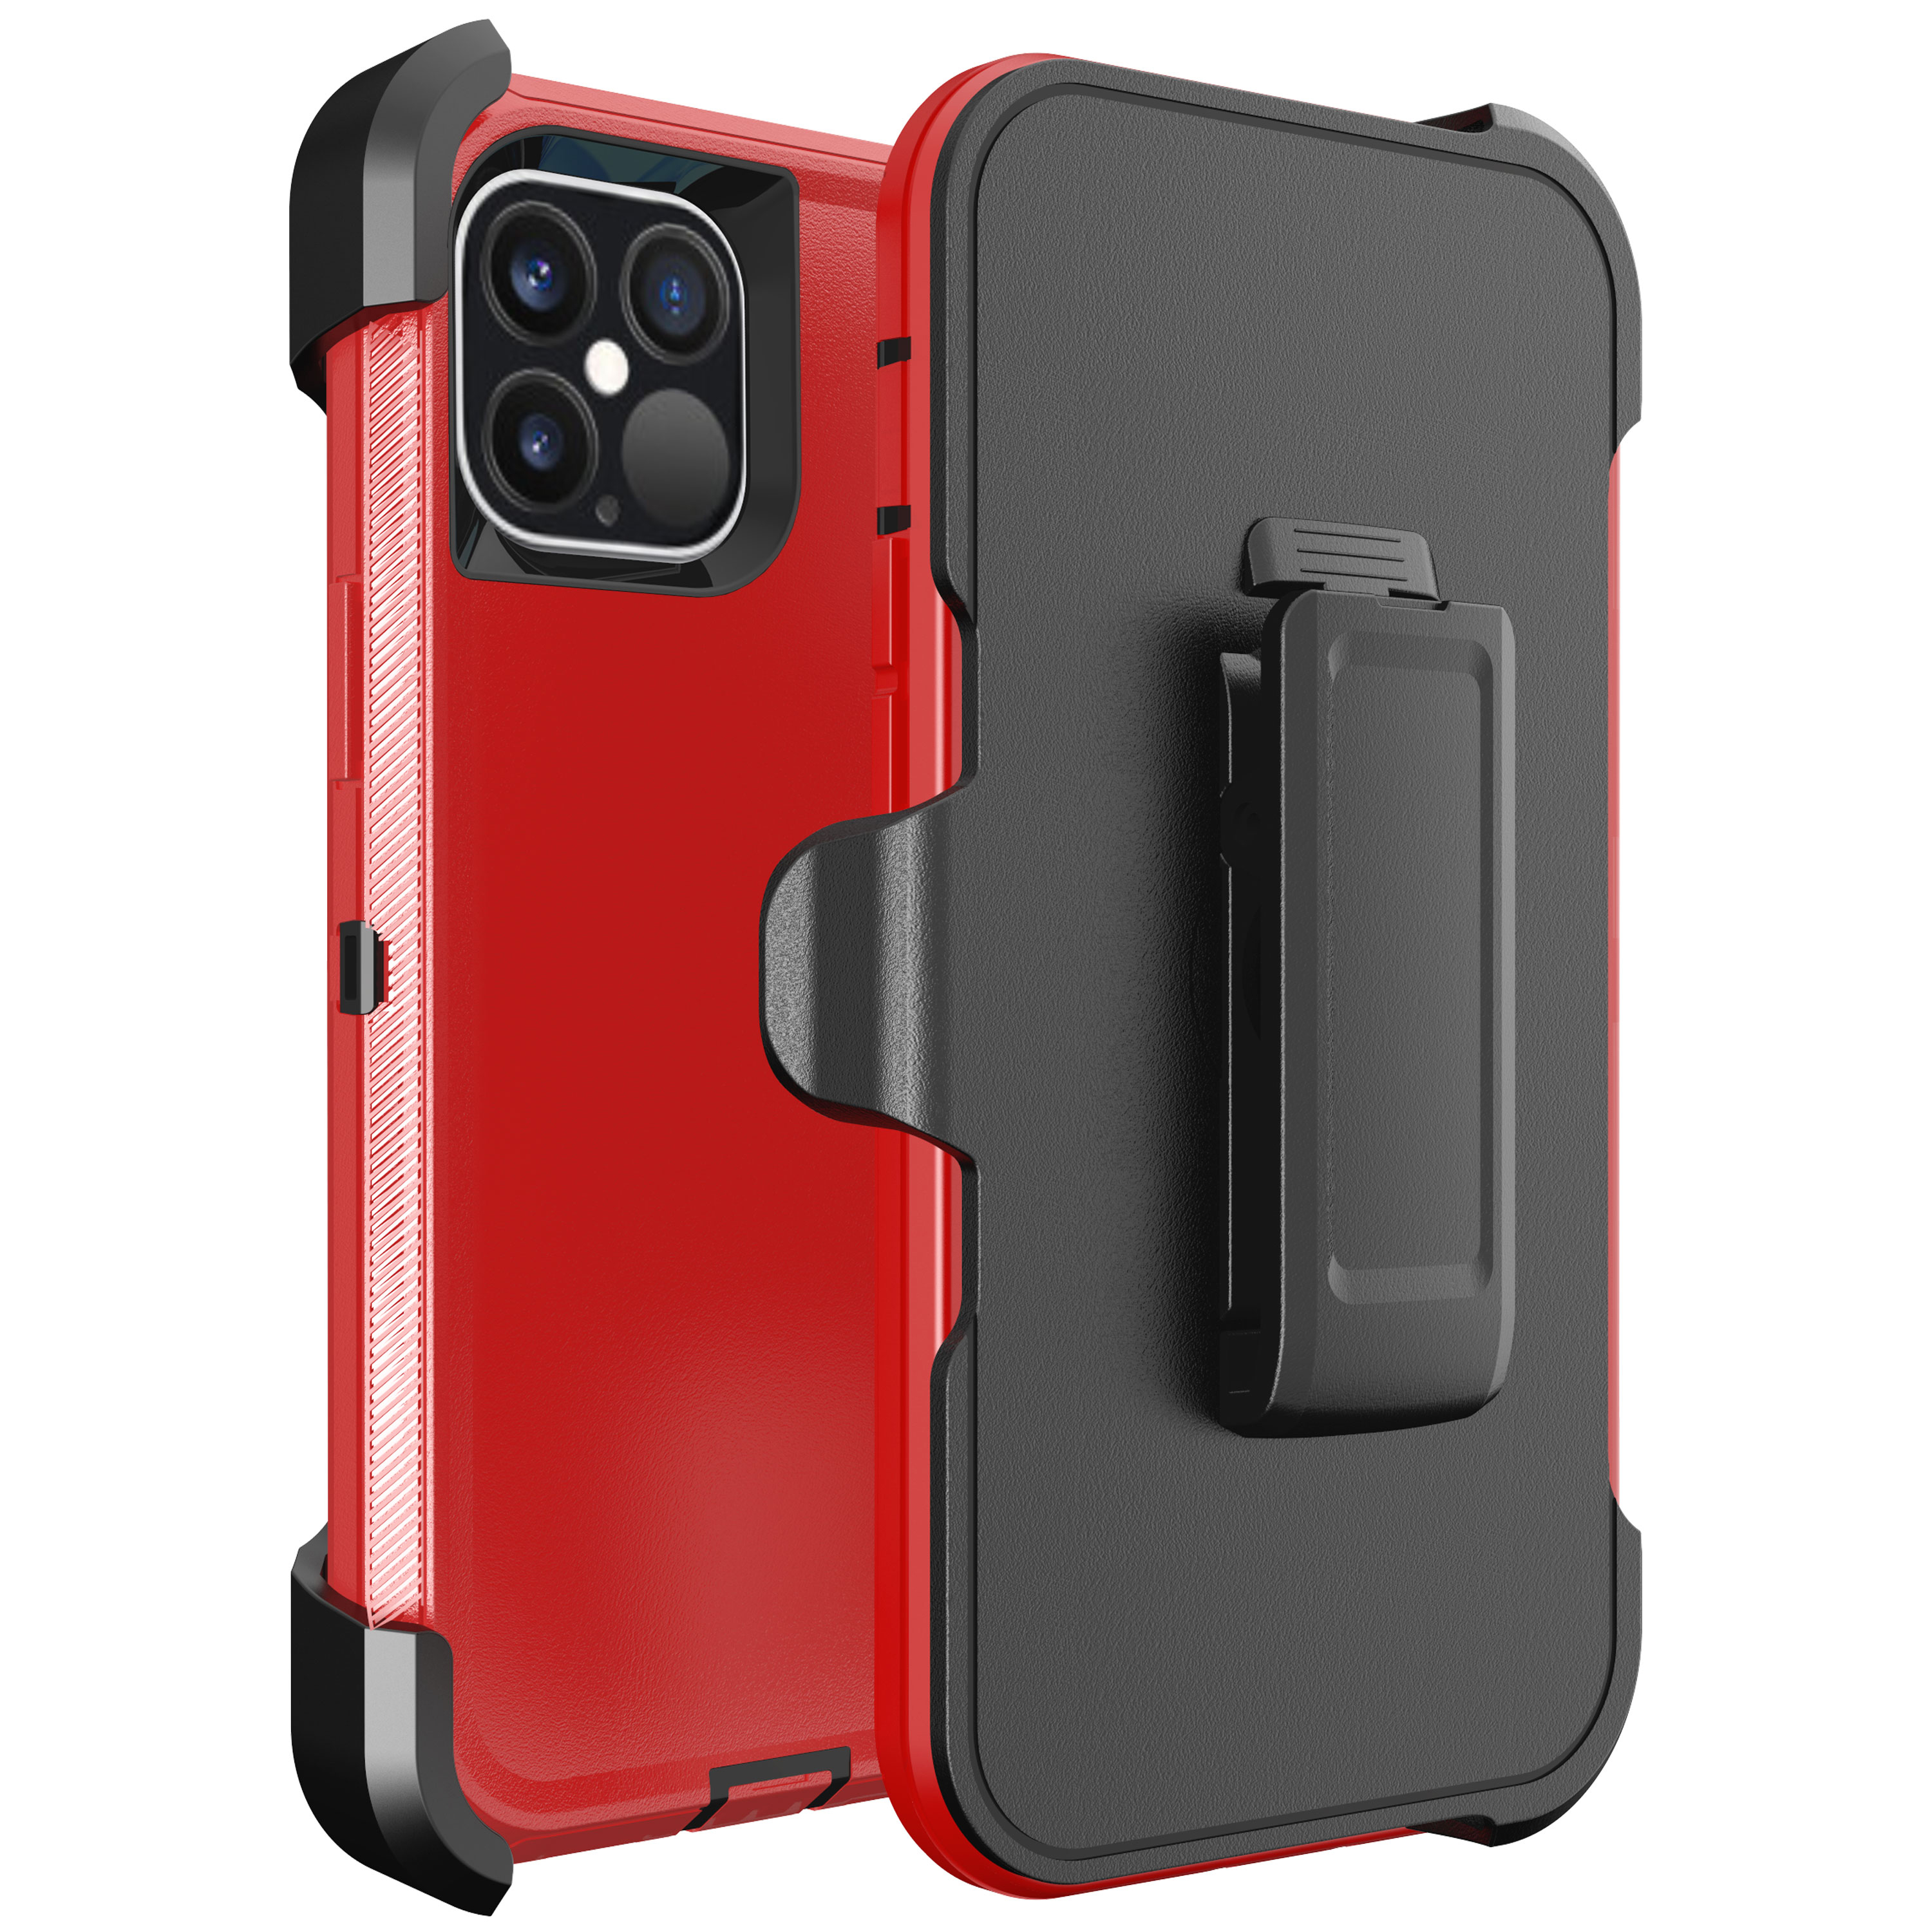 Armor Robot Case With Clip for iPHONE 12 / 12 Pro 6.1 (Red - Black)